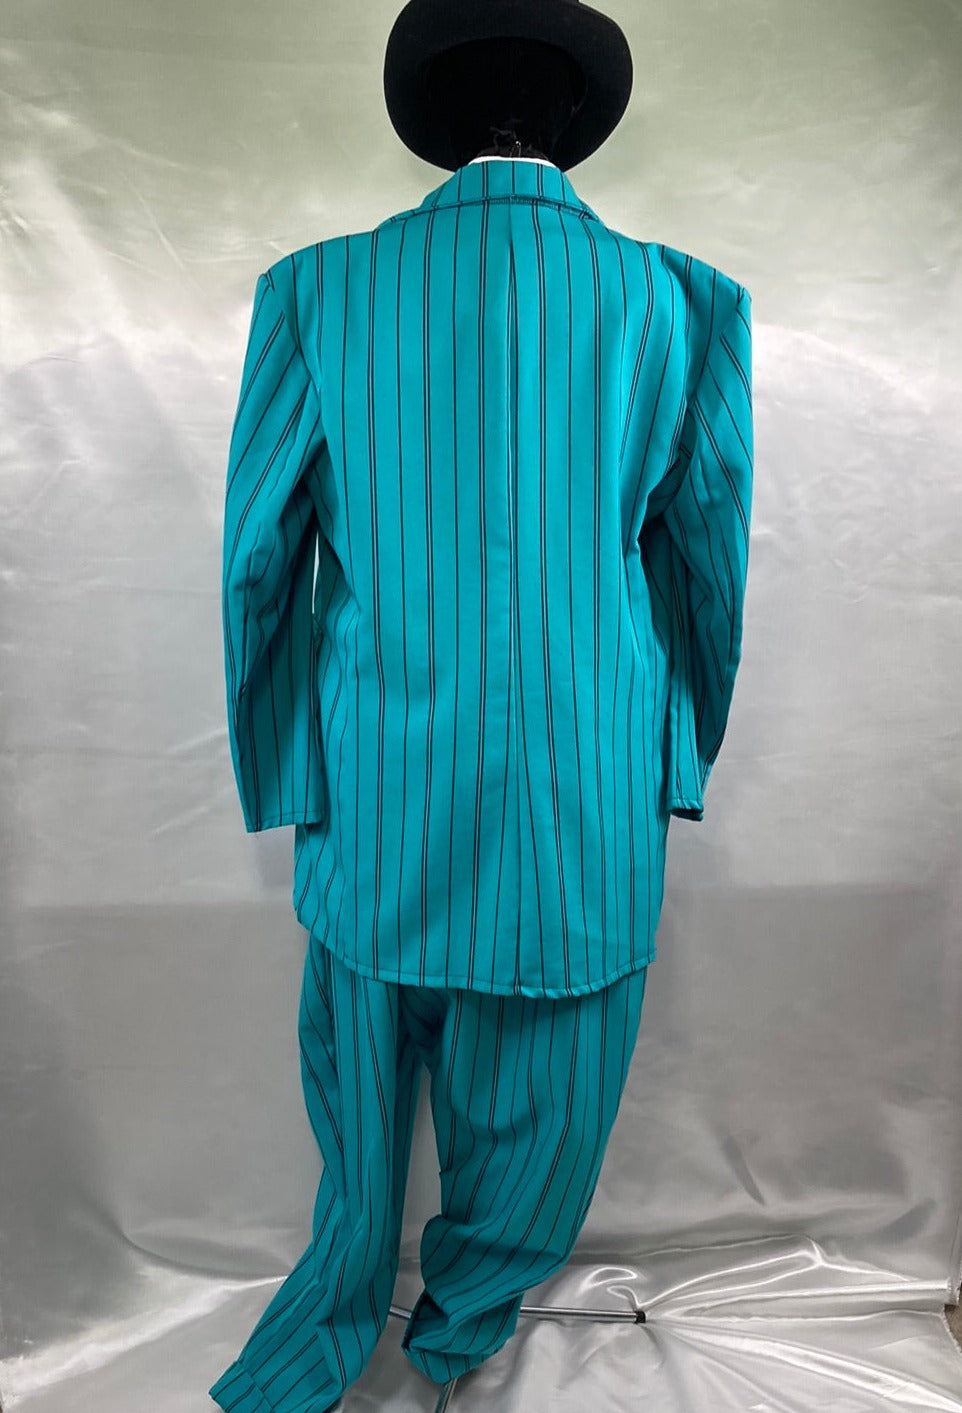 Zoot Suit Teal Green Mobster Costume Men's XLG - Preowned